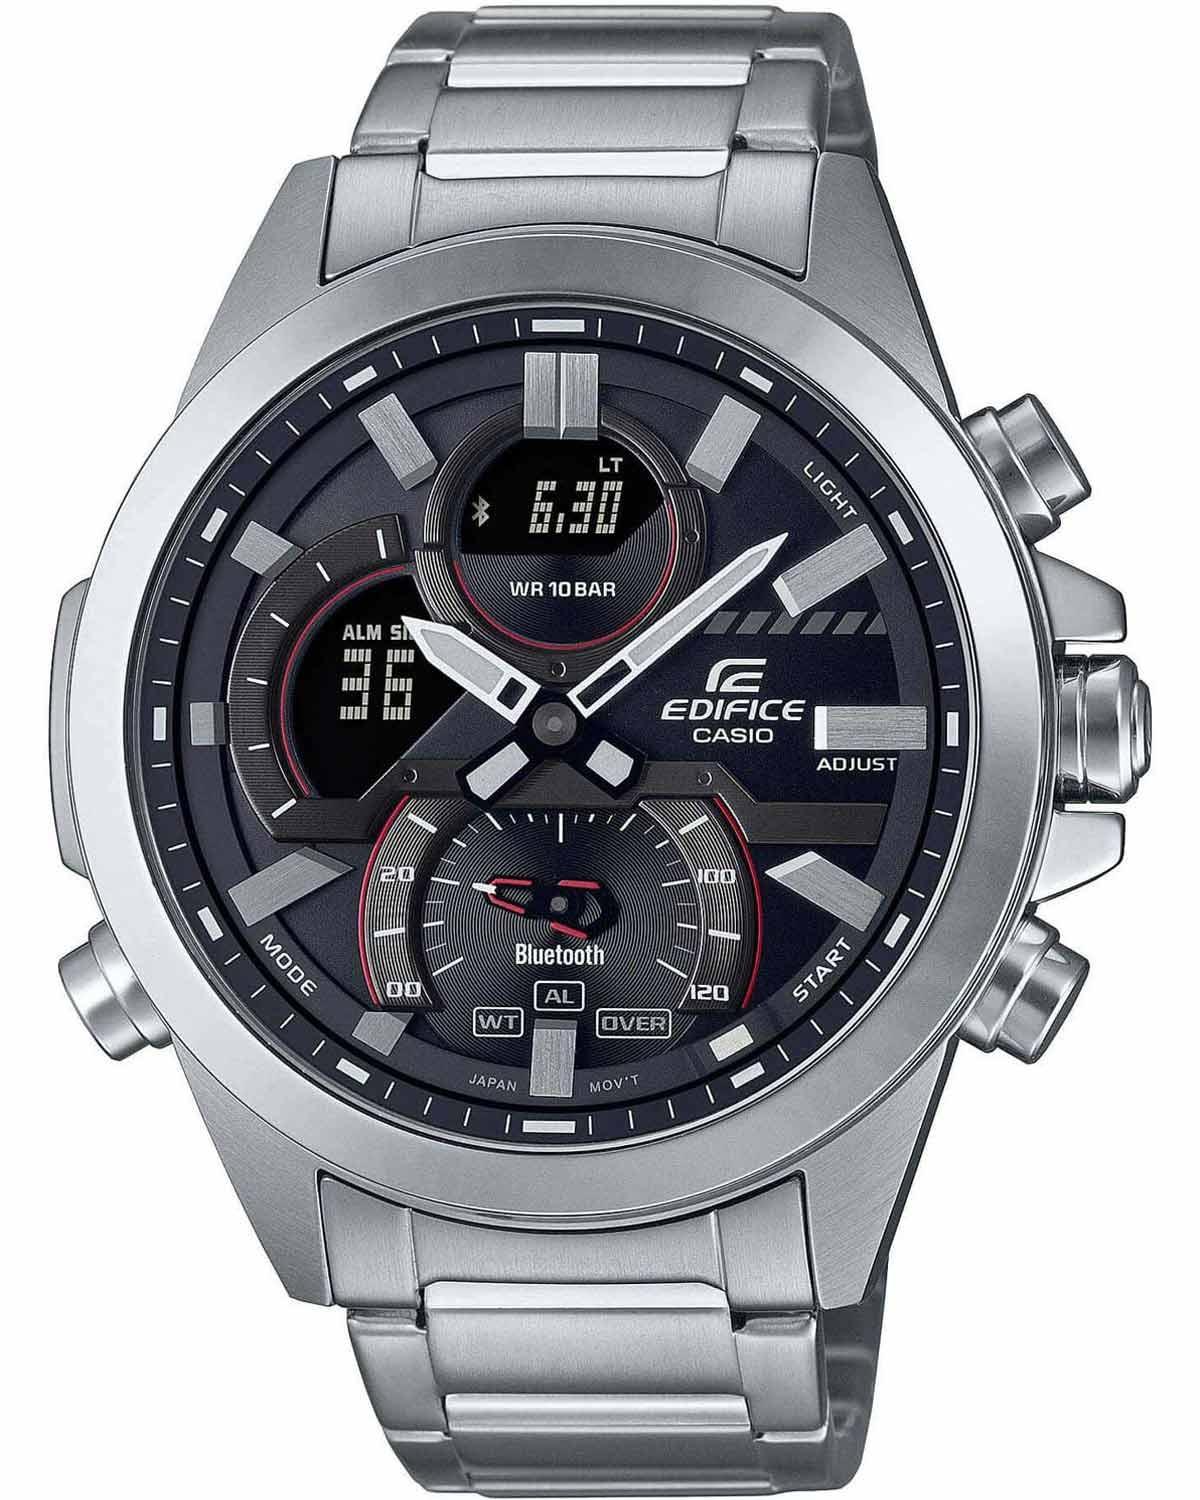 CASIO Edifice Smartwatch Bluetooth Chronograph - ECB-30D-1AEF, Silver case with Stainless Steel Bracelet